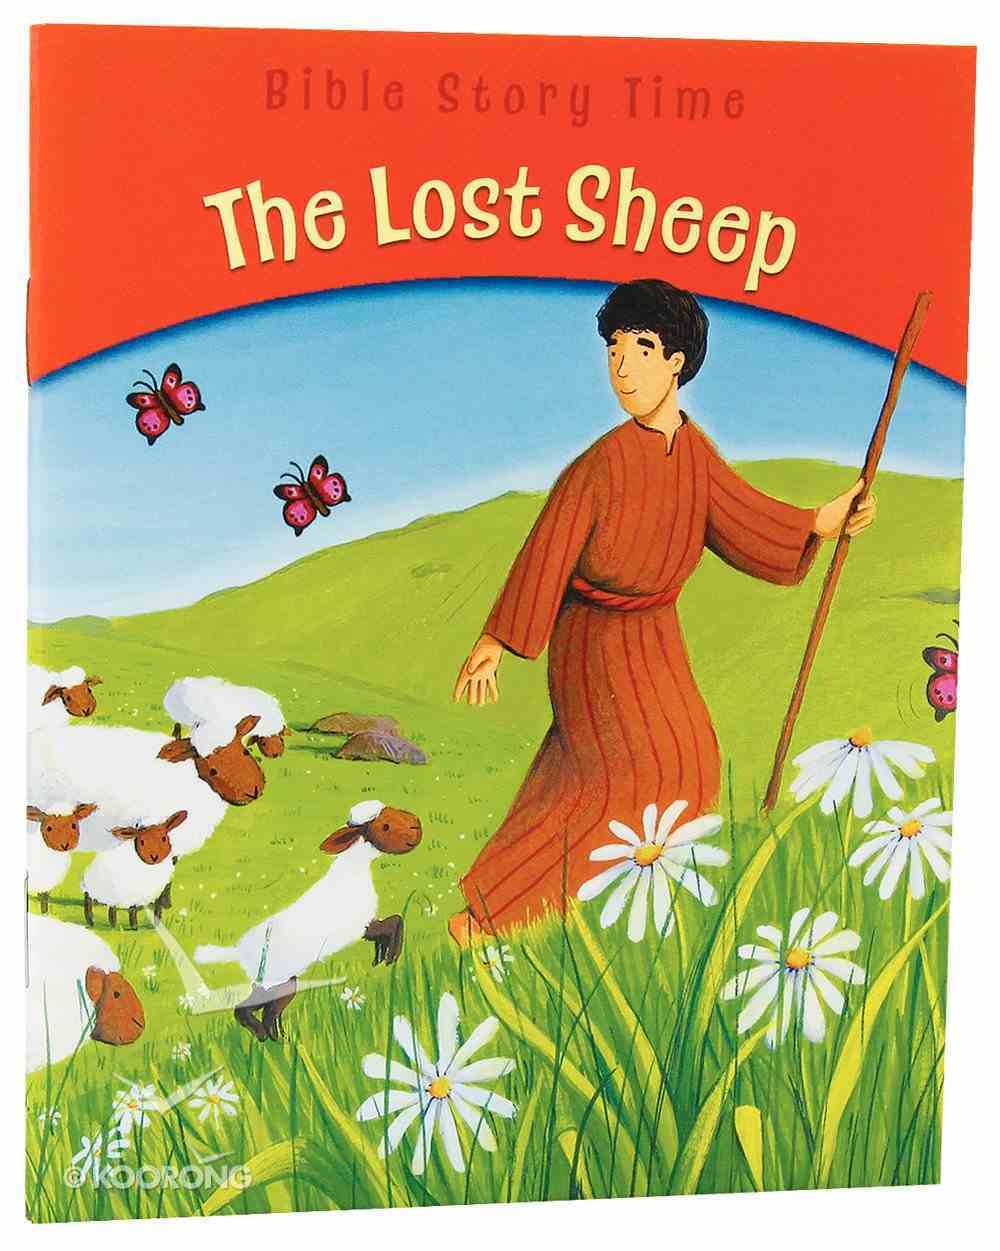 The Lost Sheep (Bible Story Time New Testament Series) Paperback